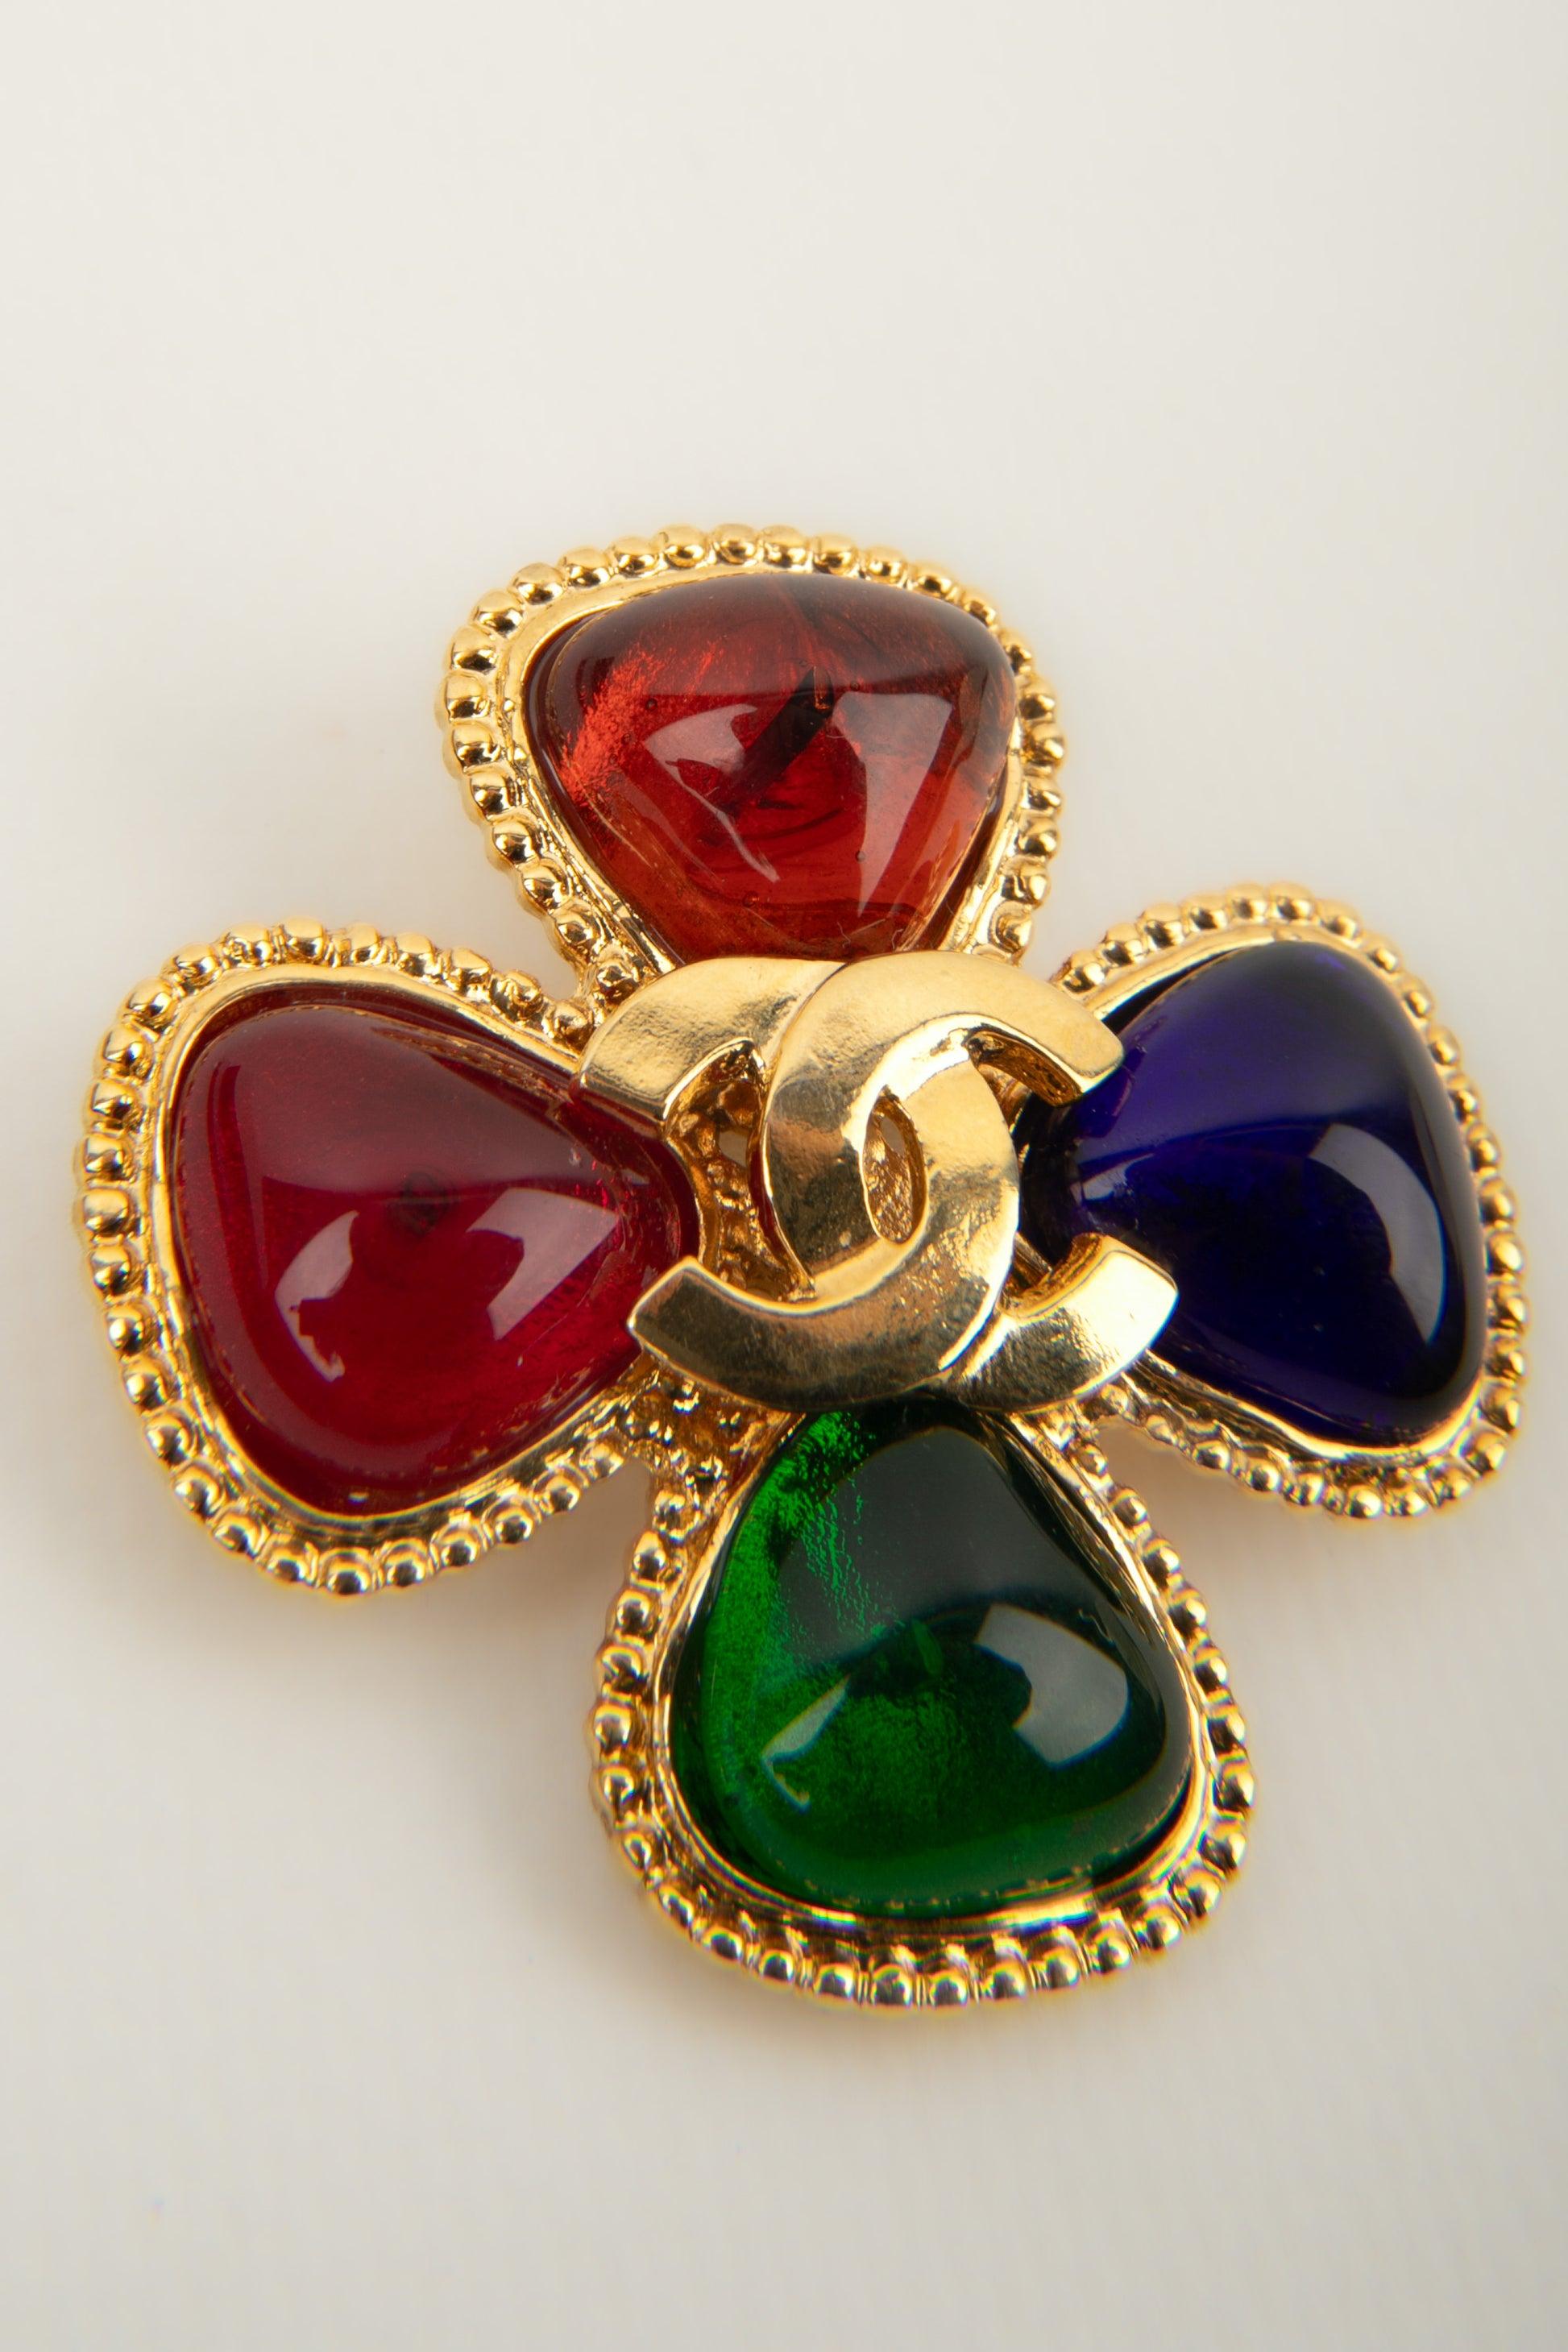 Chanel - (Made in France) Golden metal cc brooch with colored glass paste. 1996 Fall-Winter Collection.

Additional information:
Condition: Very good condition
Dimensions: 5 cm x 5 cm
Period: 20th Century

Seller Reference: BRB189